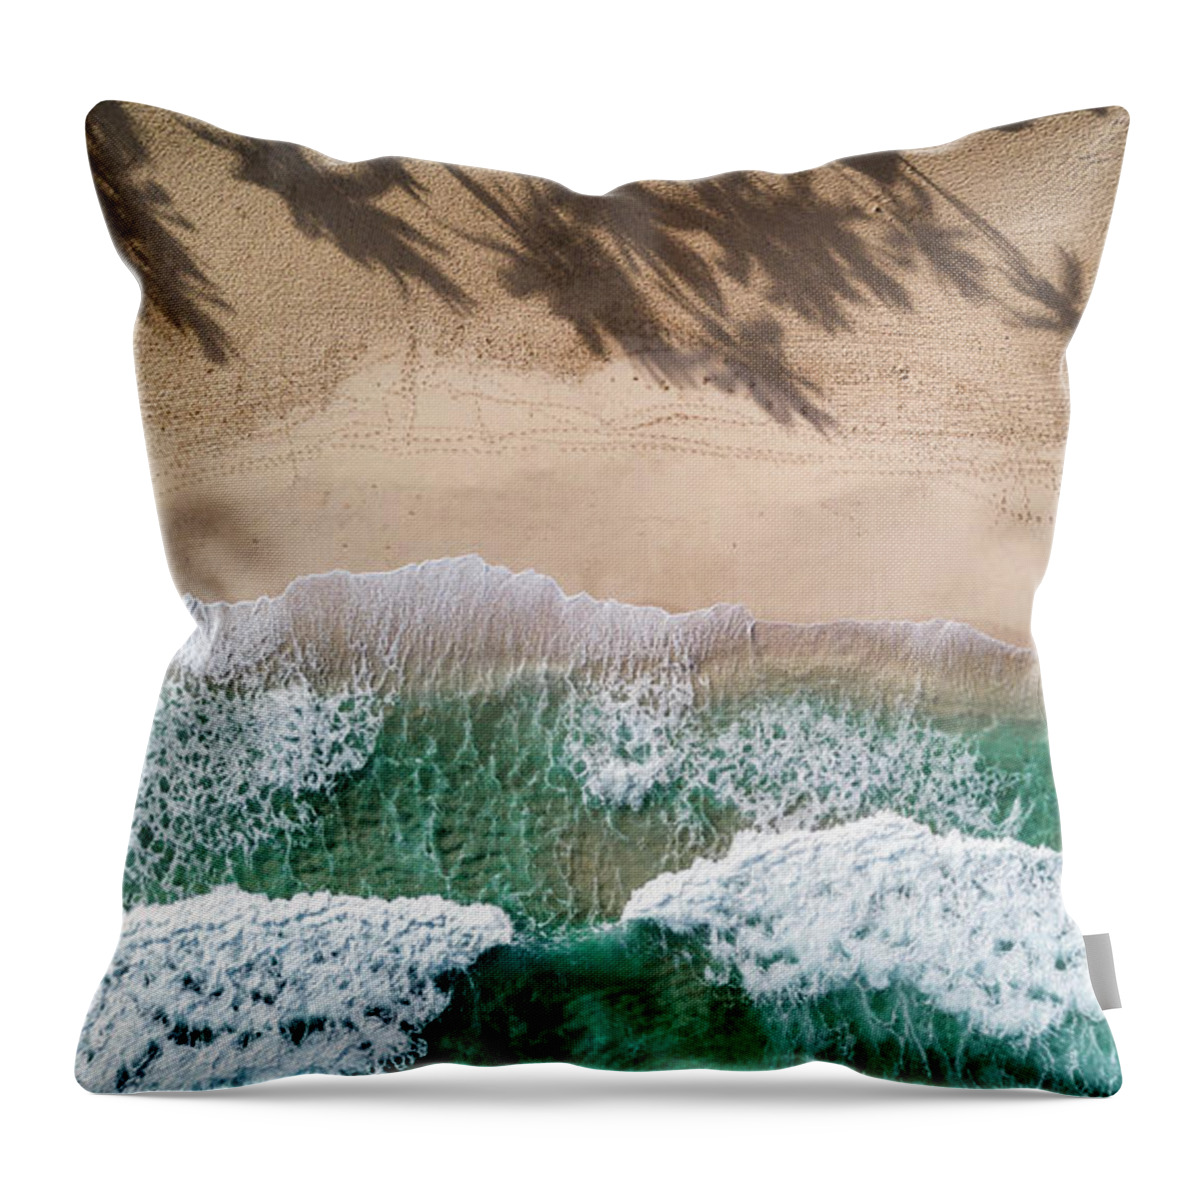  Throw Pillow featuring the photograph Pipeline Shadows by Leonardo Dale